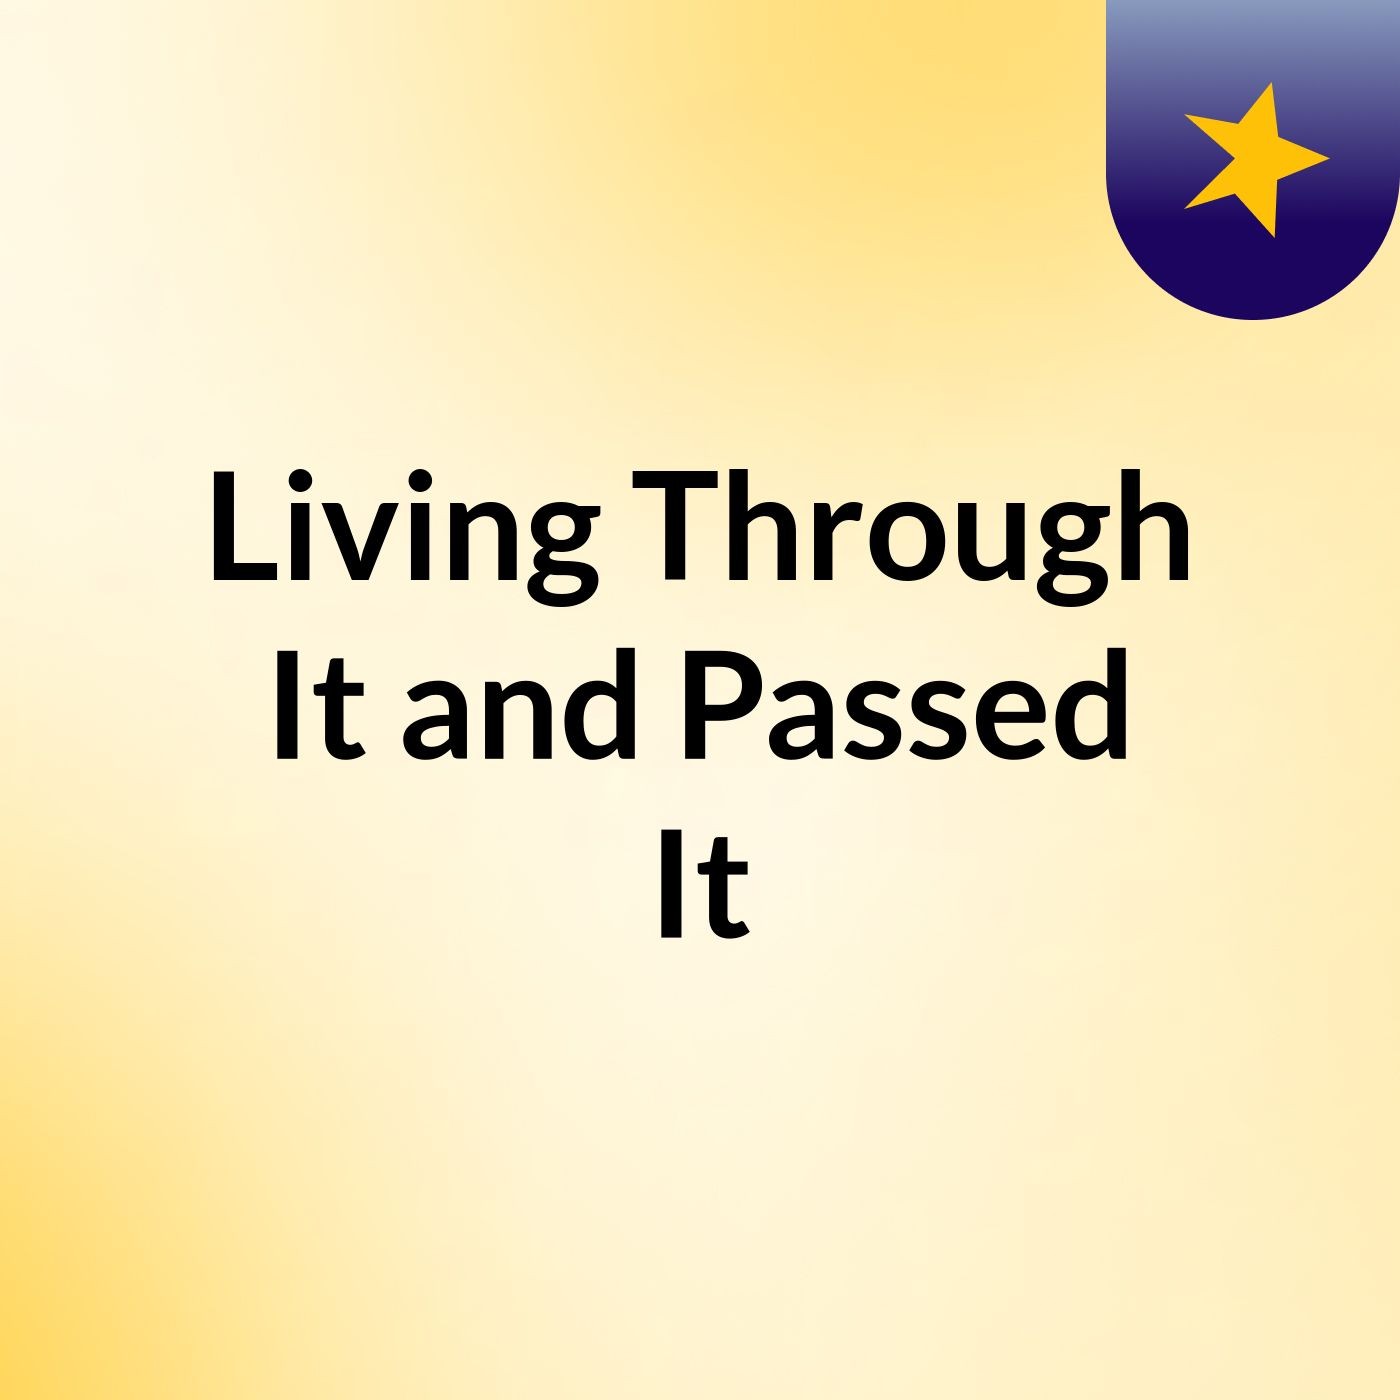 Living Through It and Passed It